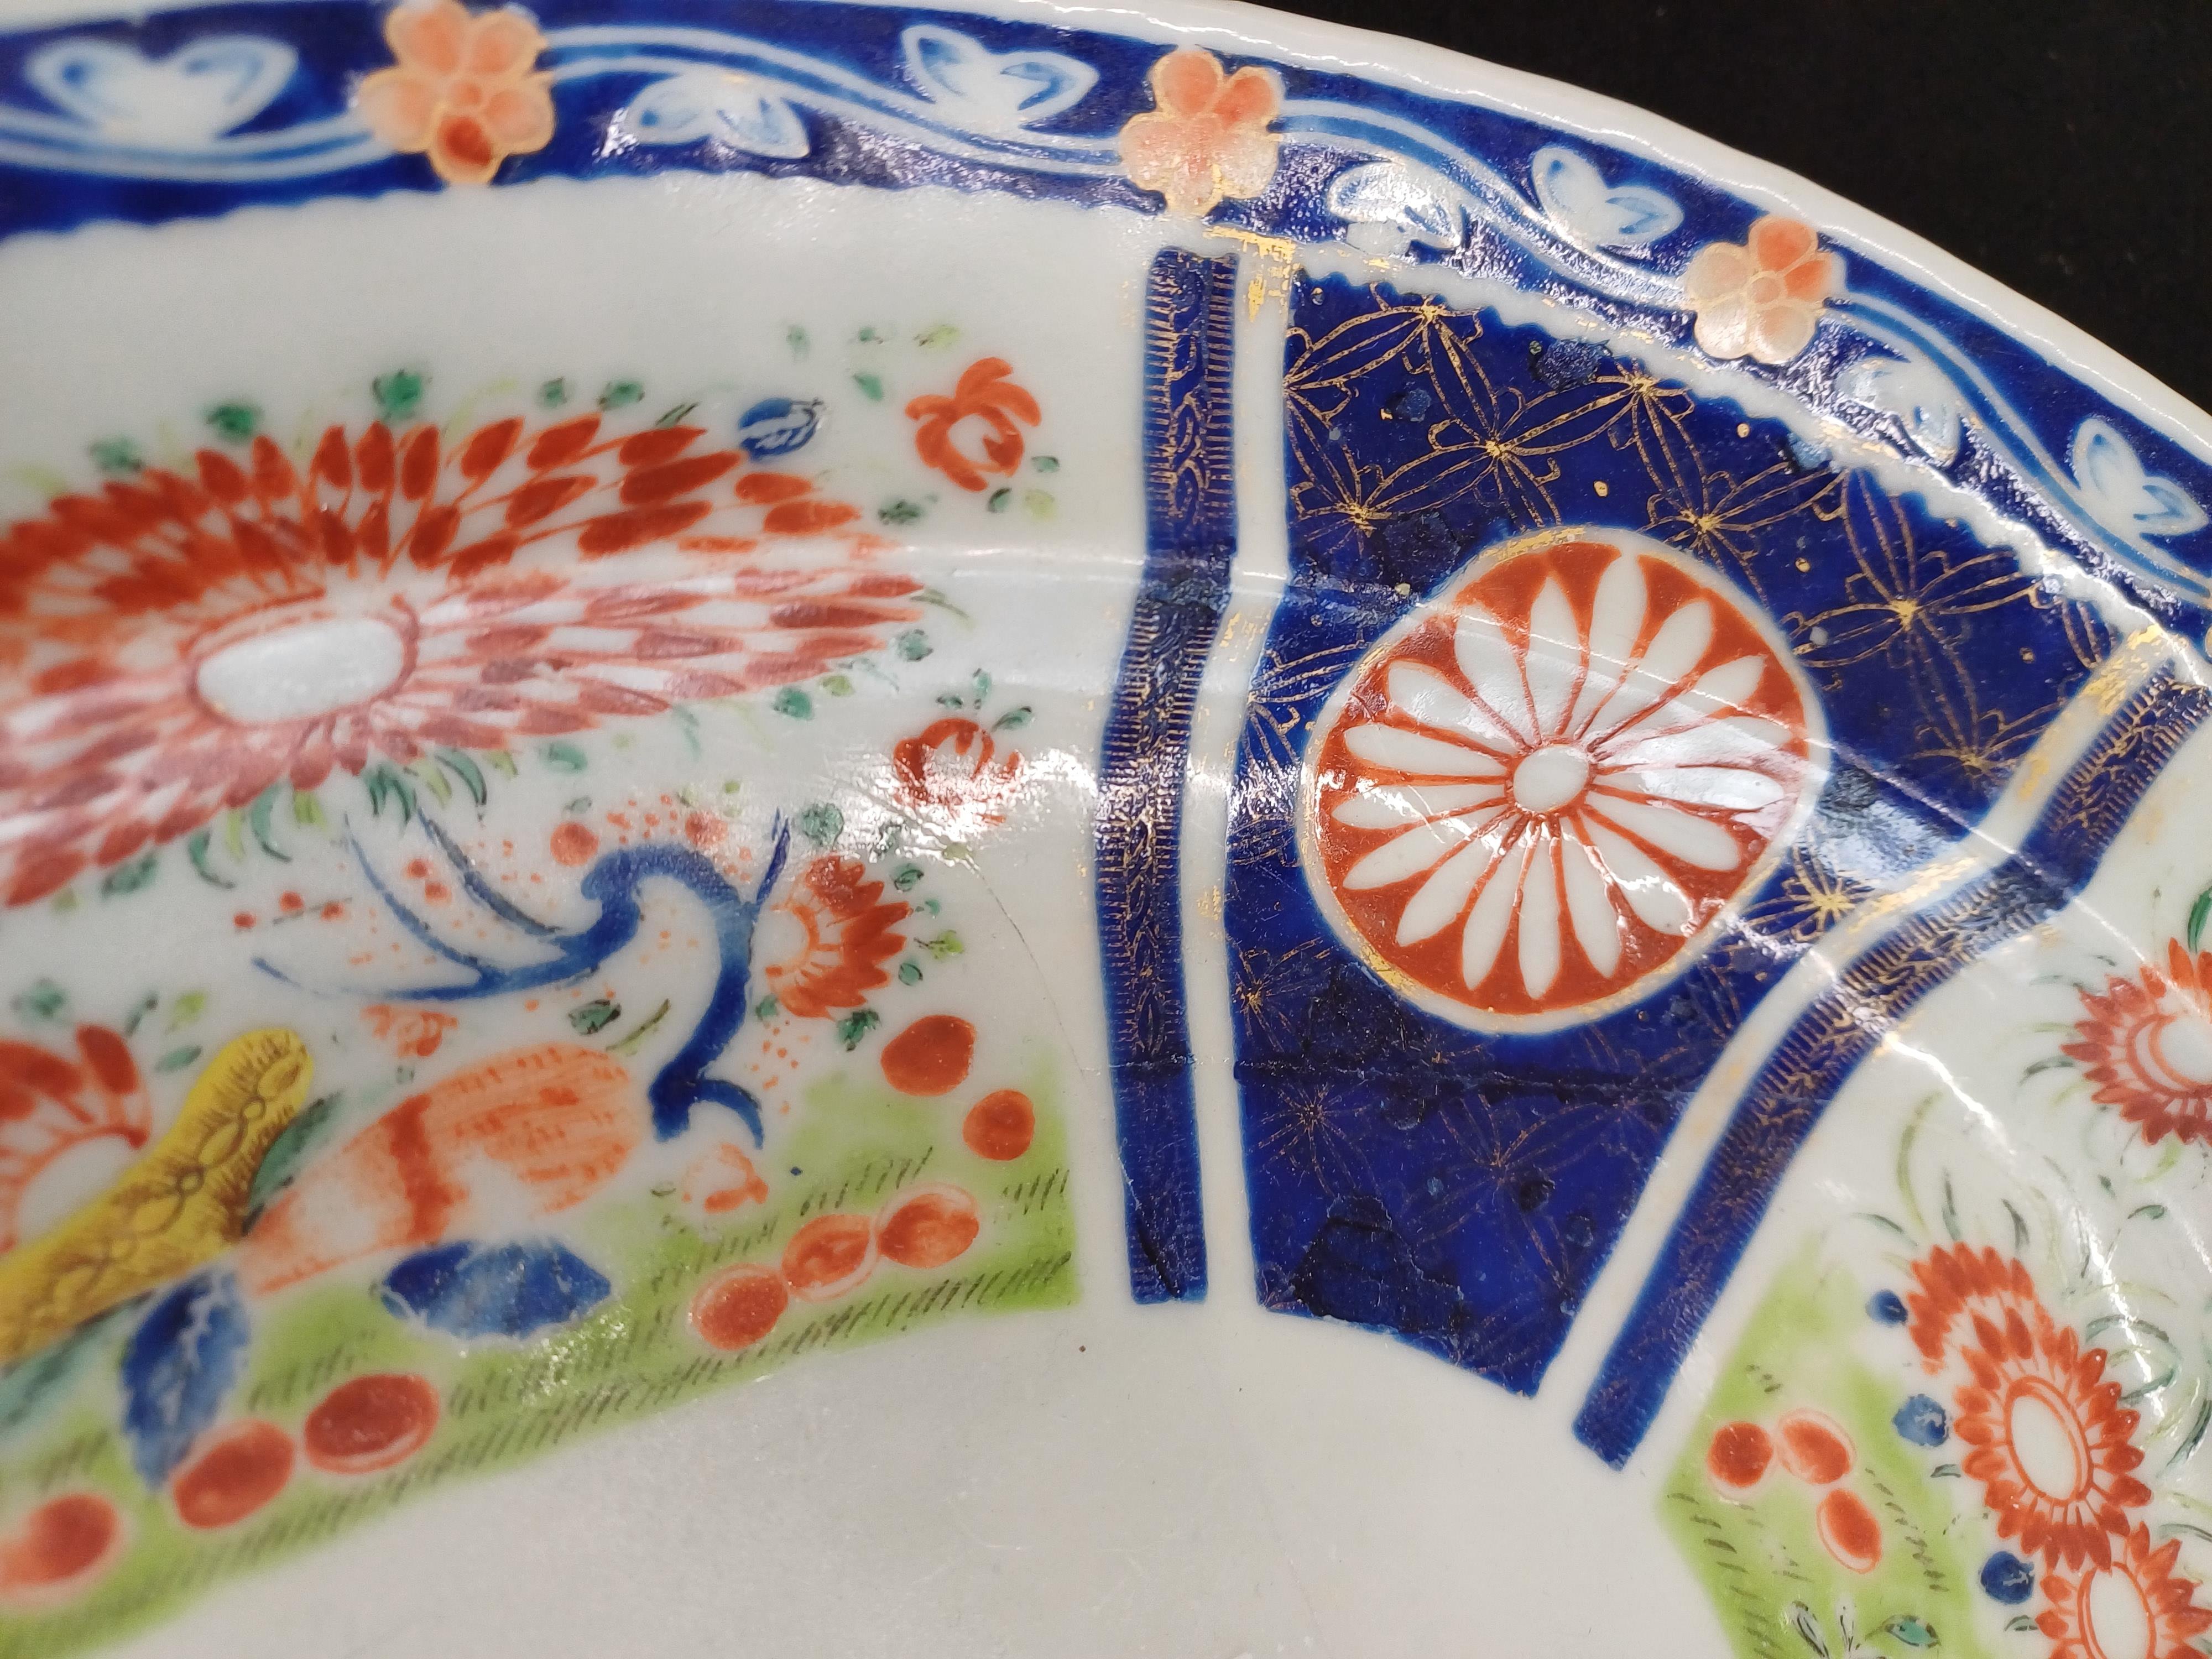 A CHINESE EXPORT ARMORIAL OVAL DISH FOR THE INDIAN MARKET 清十九世紀 約1820年 外銷粉彩繪徽章紋盤 - Image 5 of 7